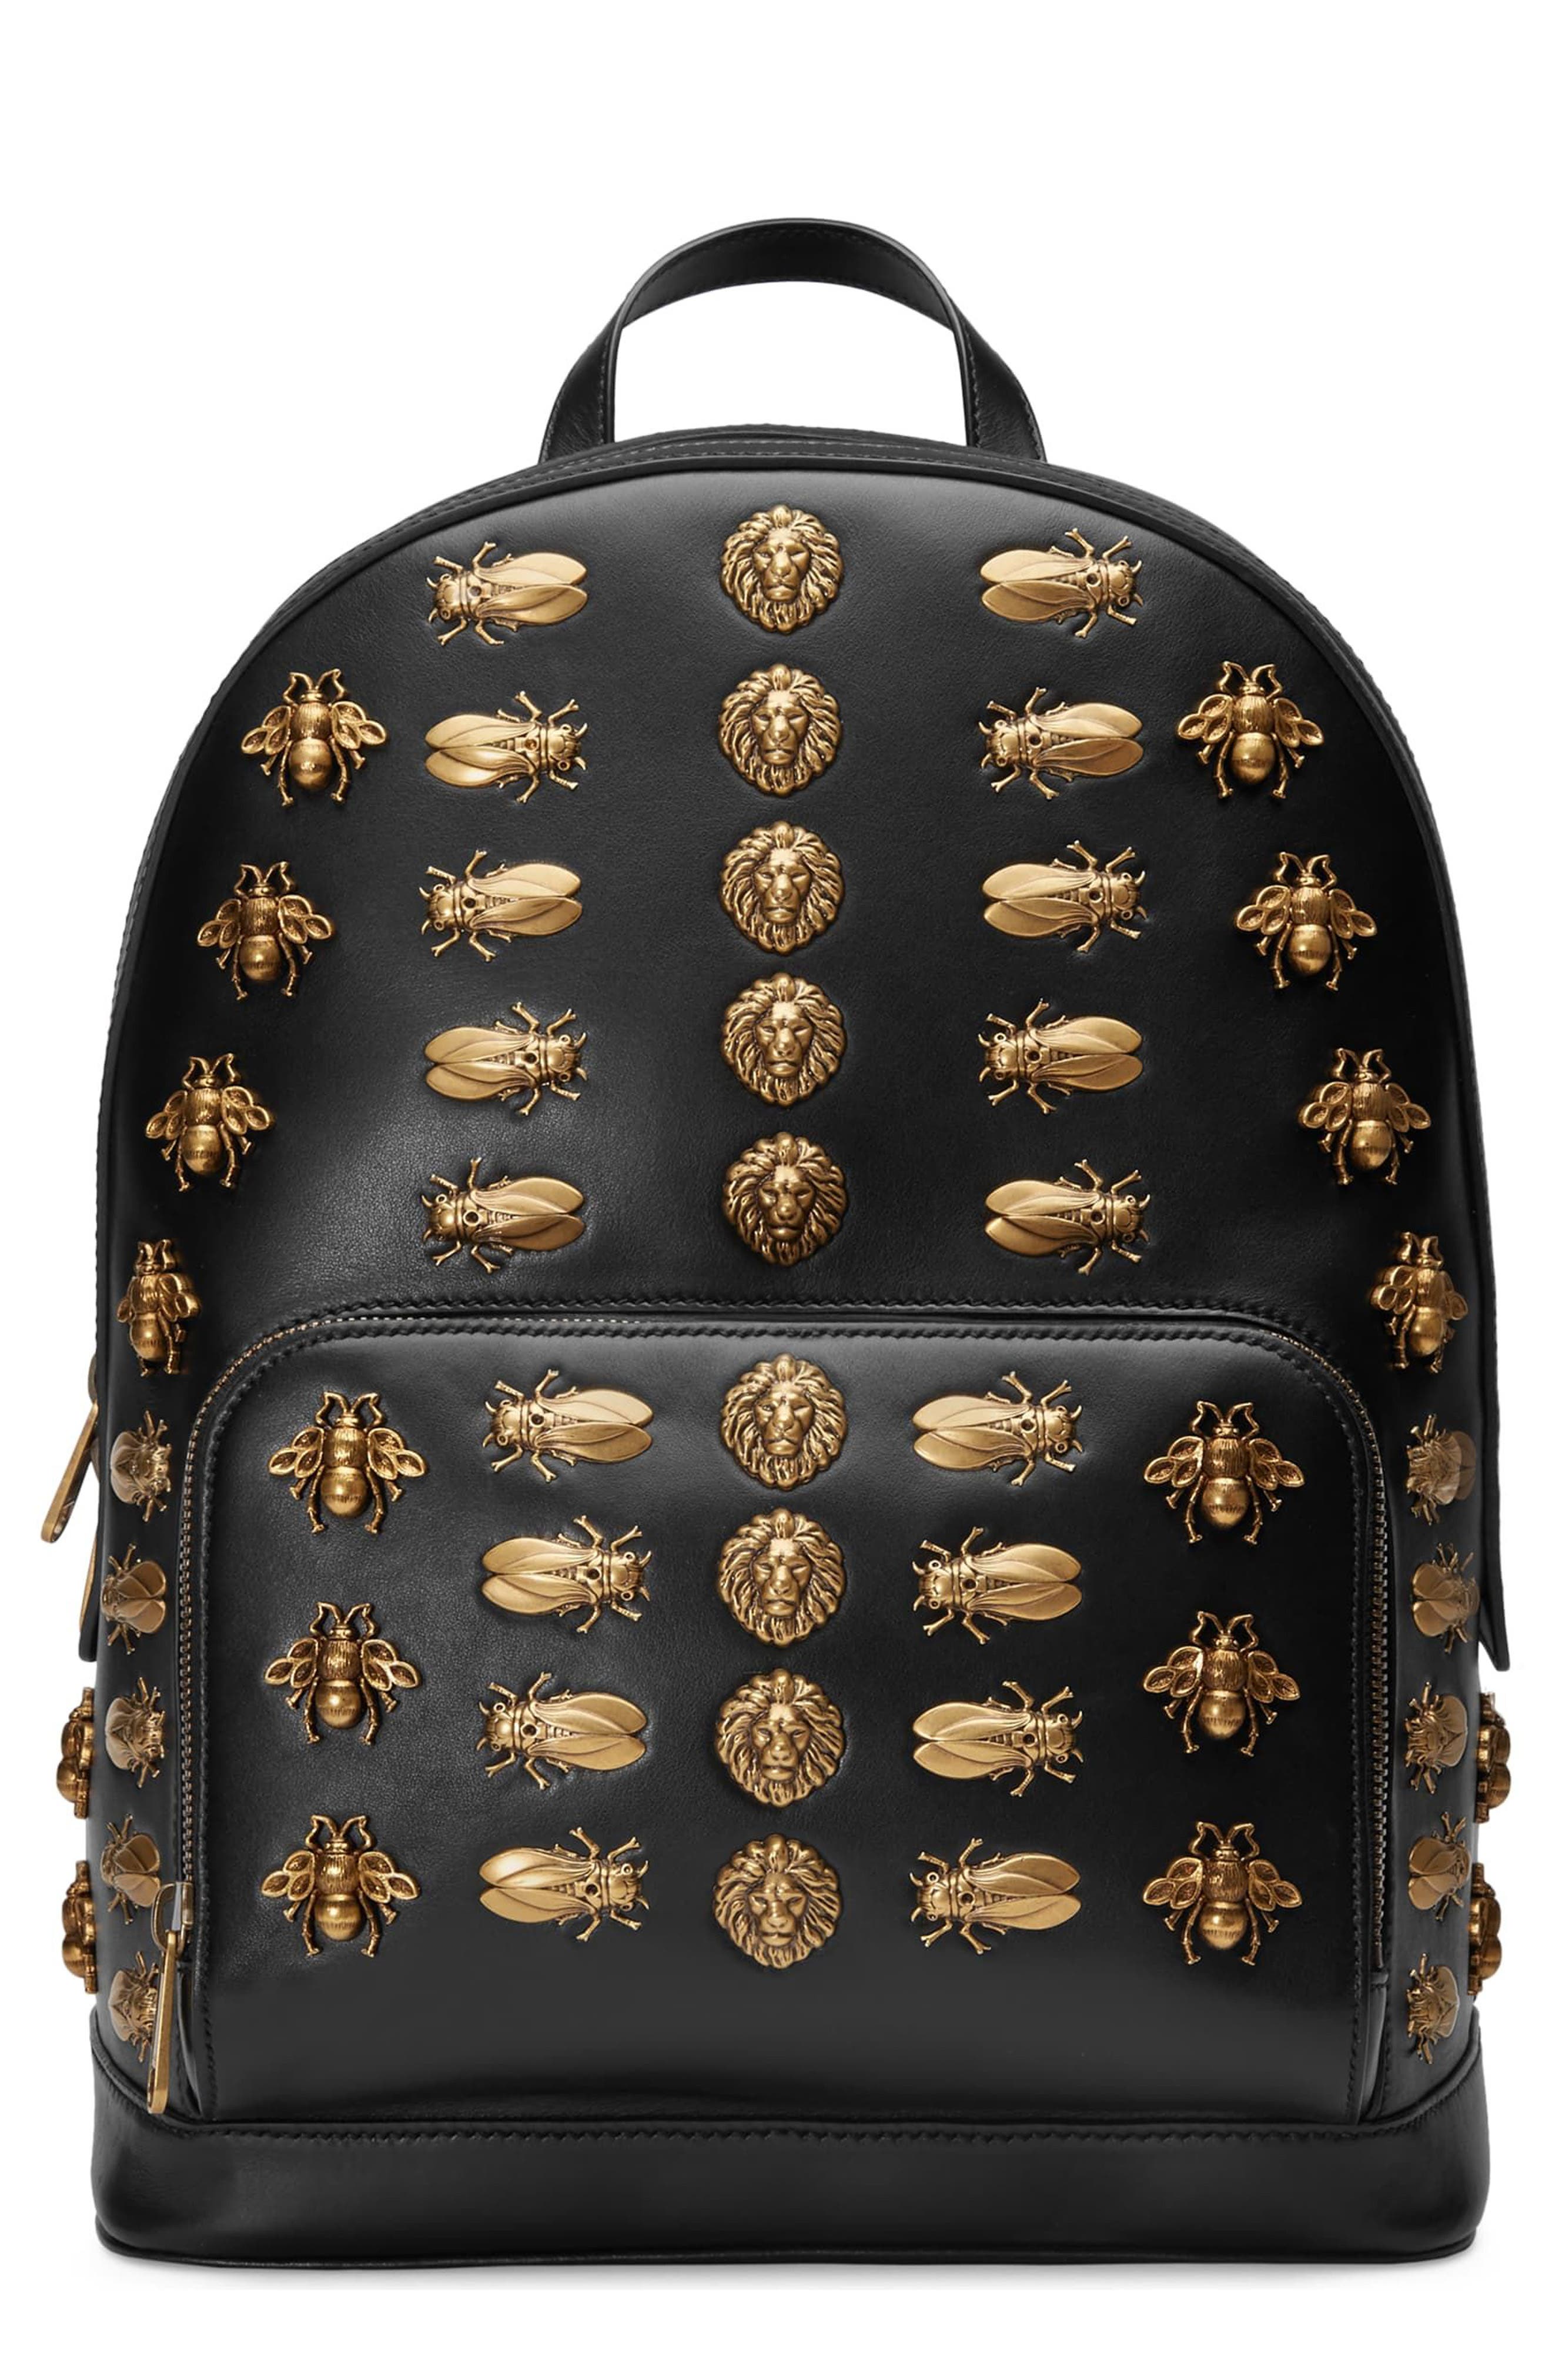 Gucci Animal Studs Leather Backpack 